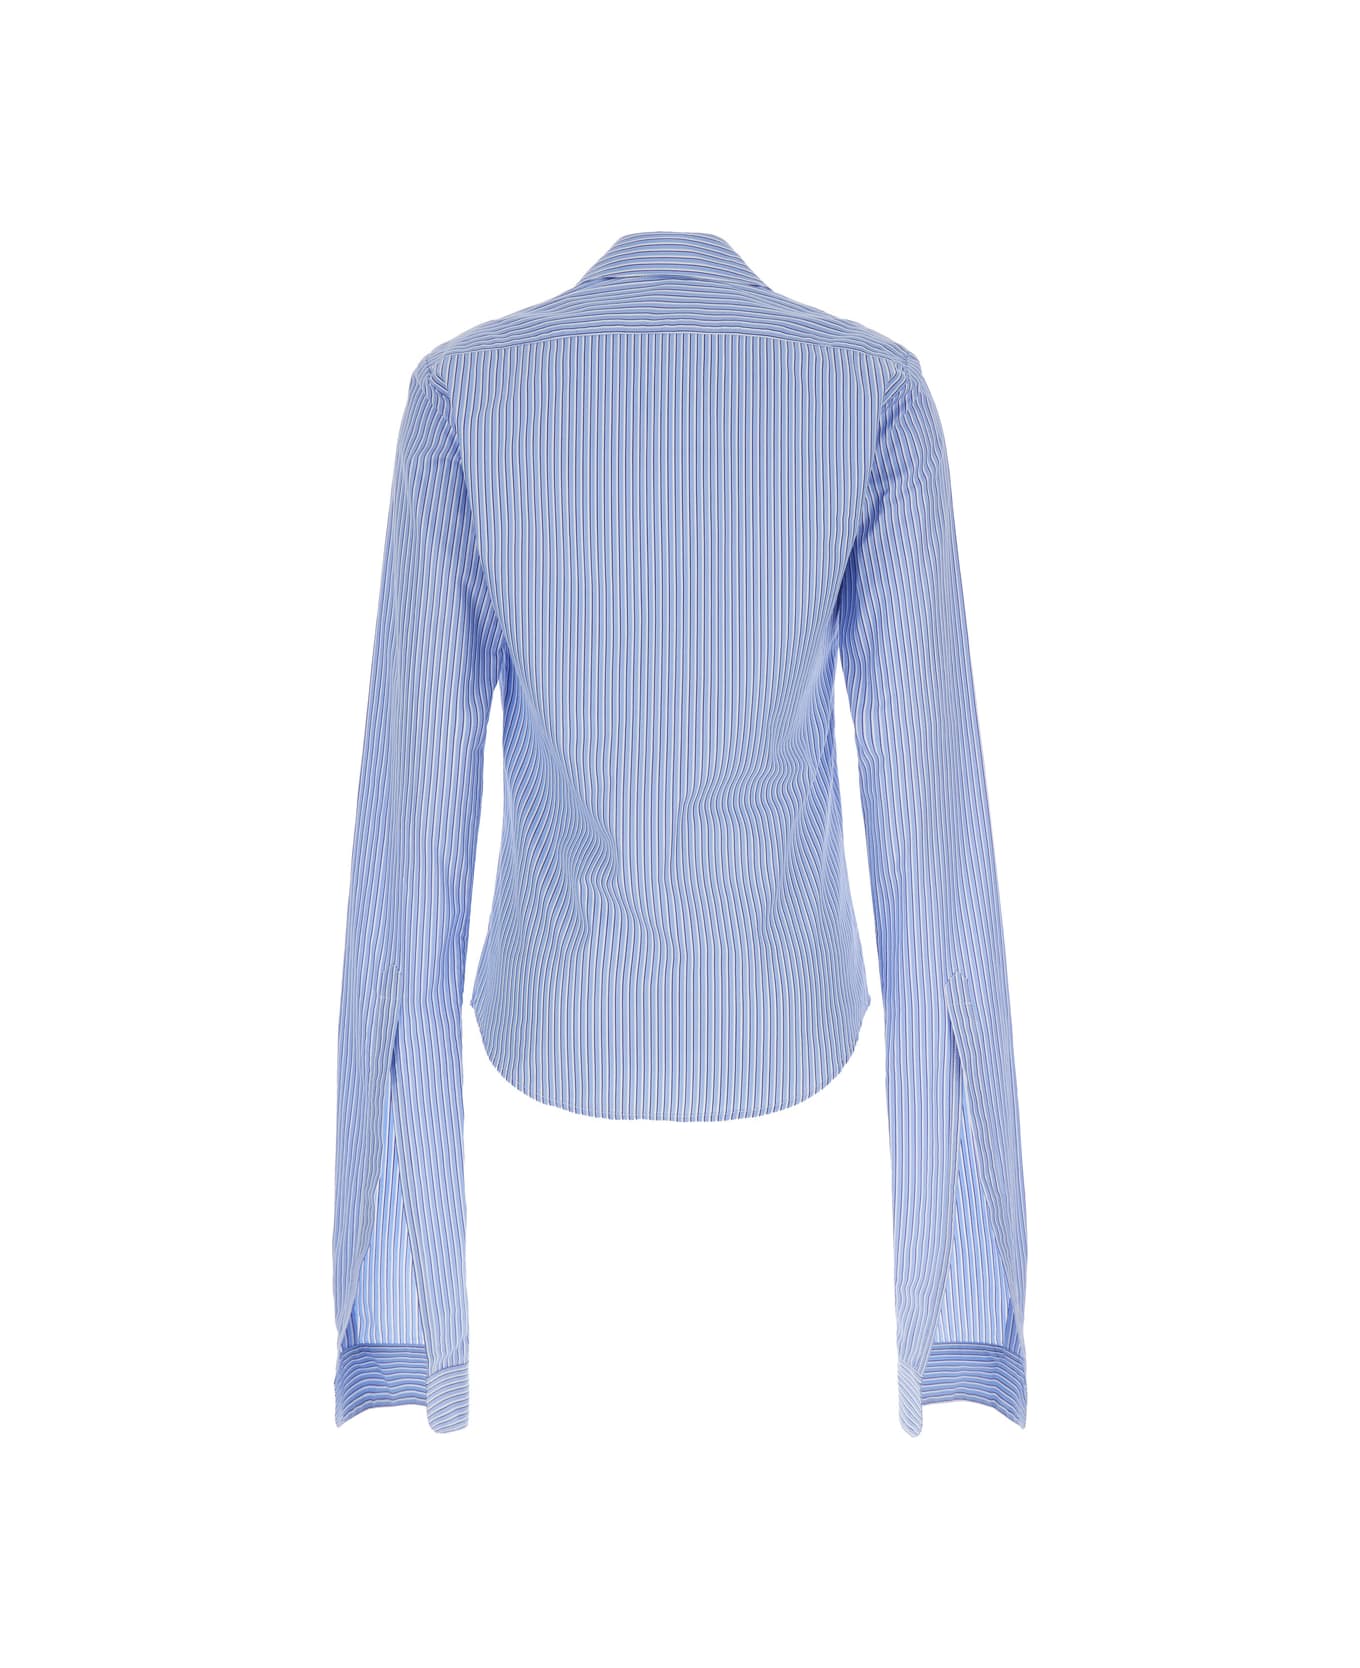 Coperni White And Light Blue Shirt With Knotted Cuffs In Cotton Woman - BLUE/WHITE